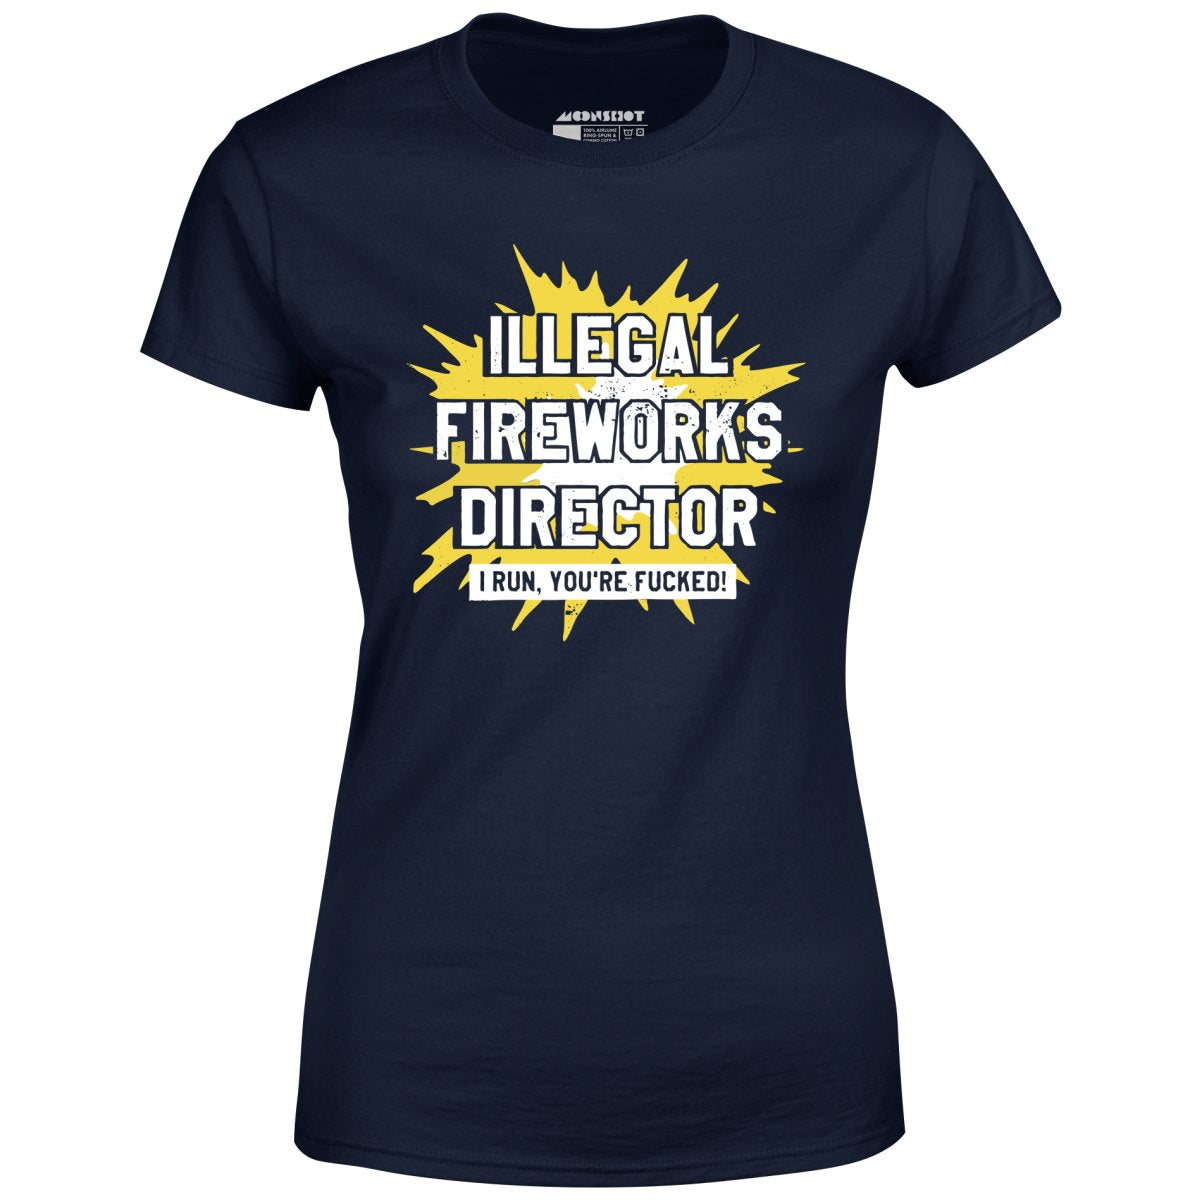 Illegal Fireworks Director I Run, You're Fucked - Women's T-Shirt